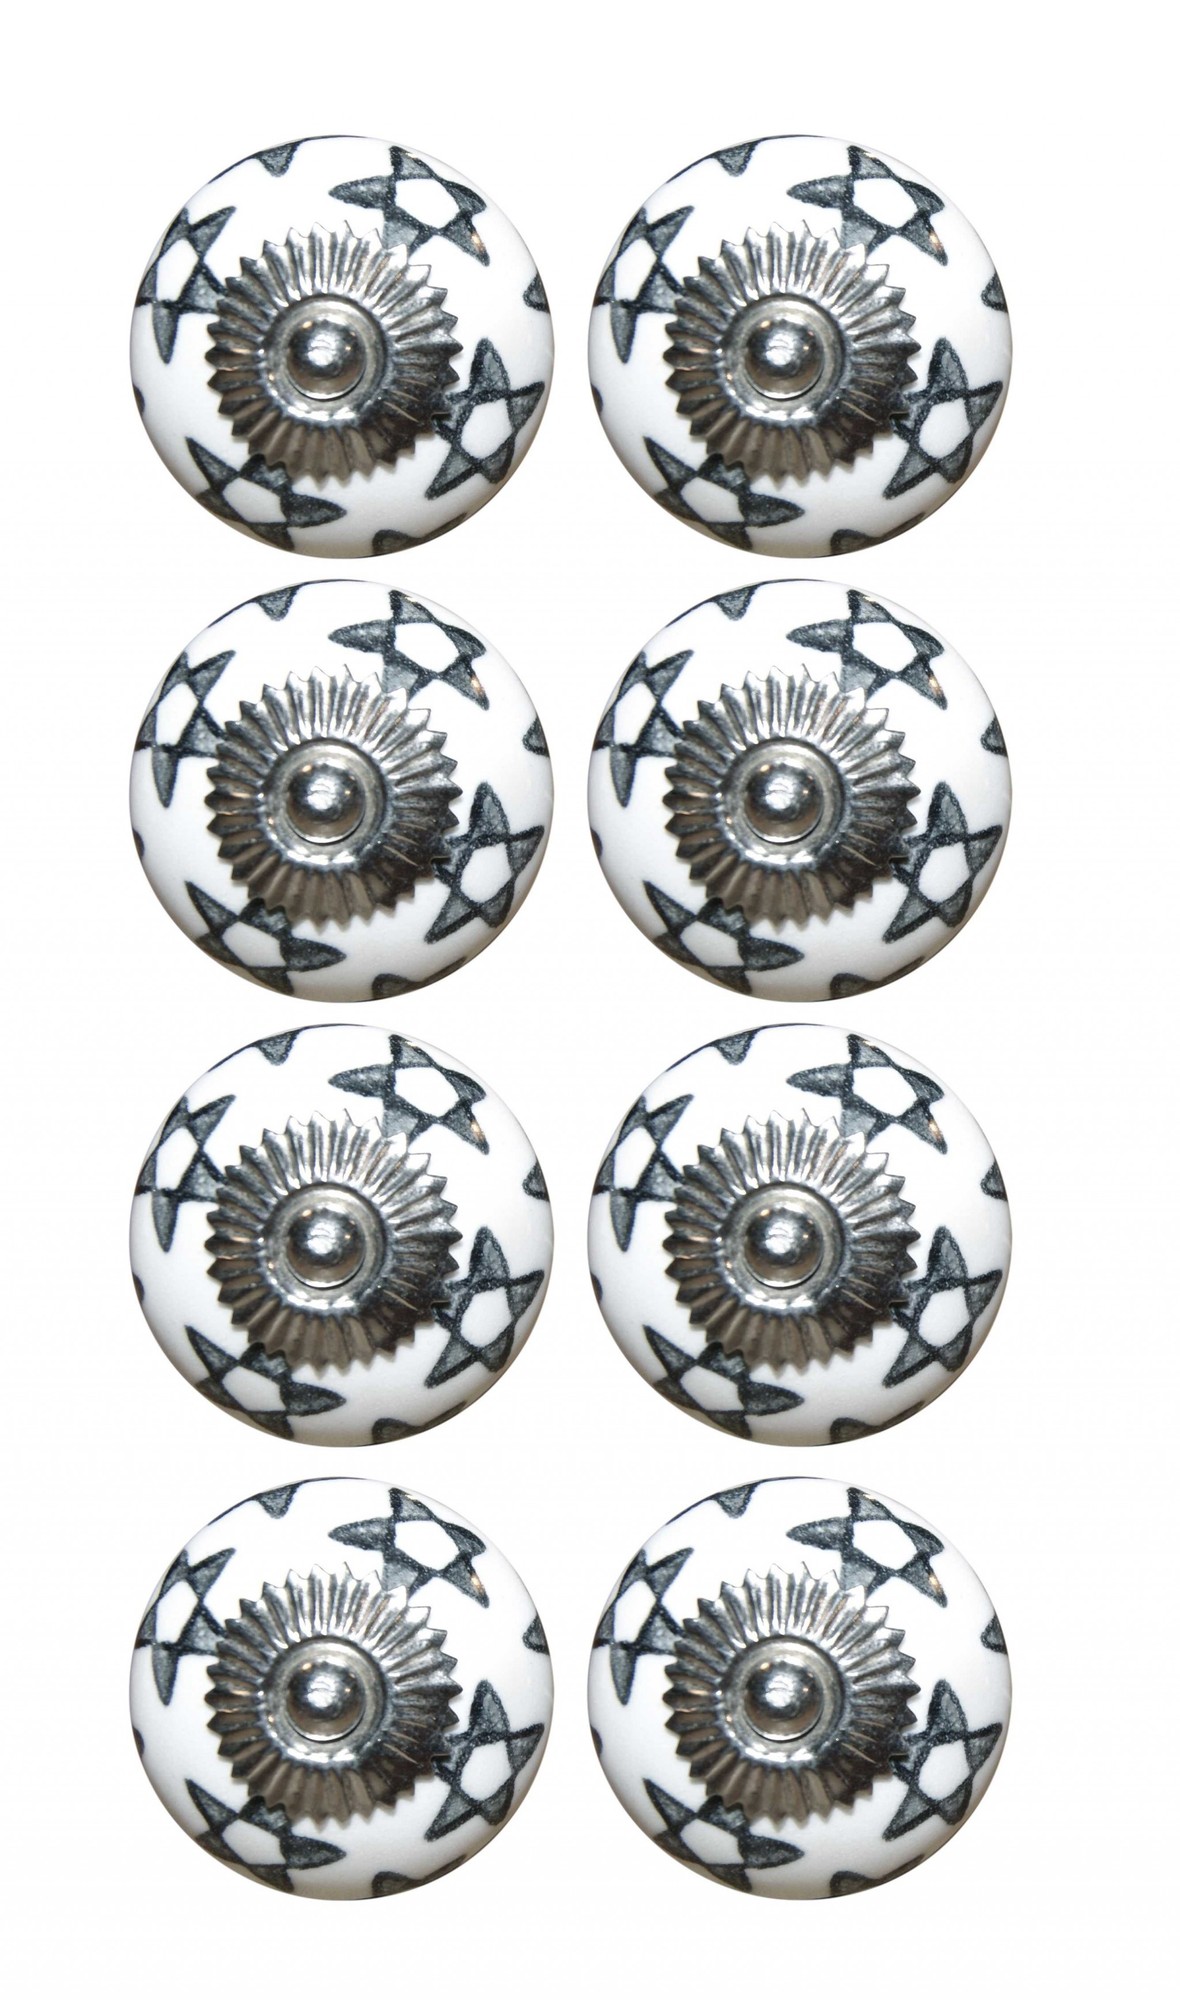 1.5" x 1.5" x 1.5" White, Silver And Gray - Knobs 8-Pack